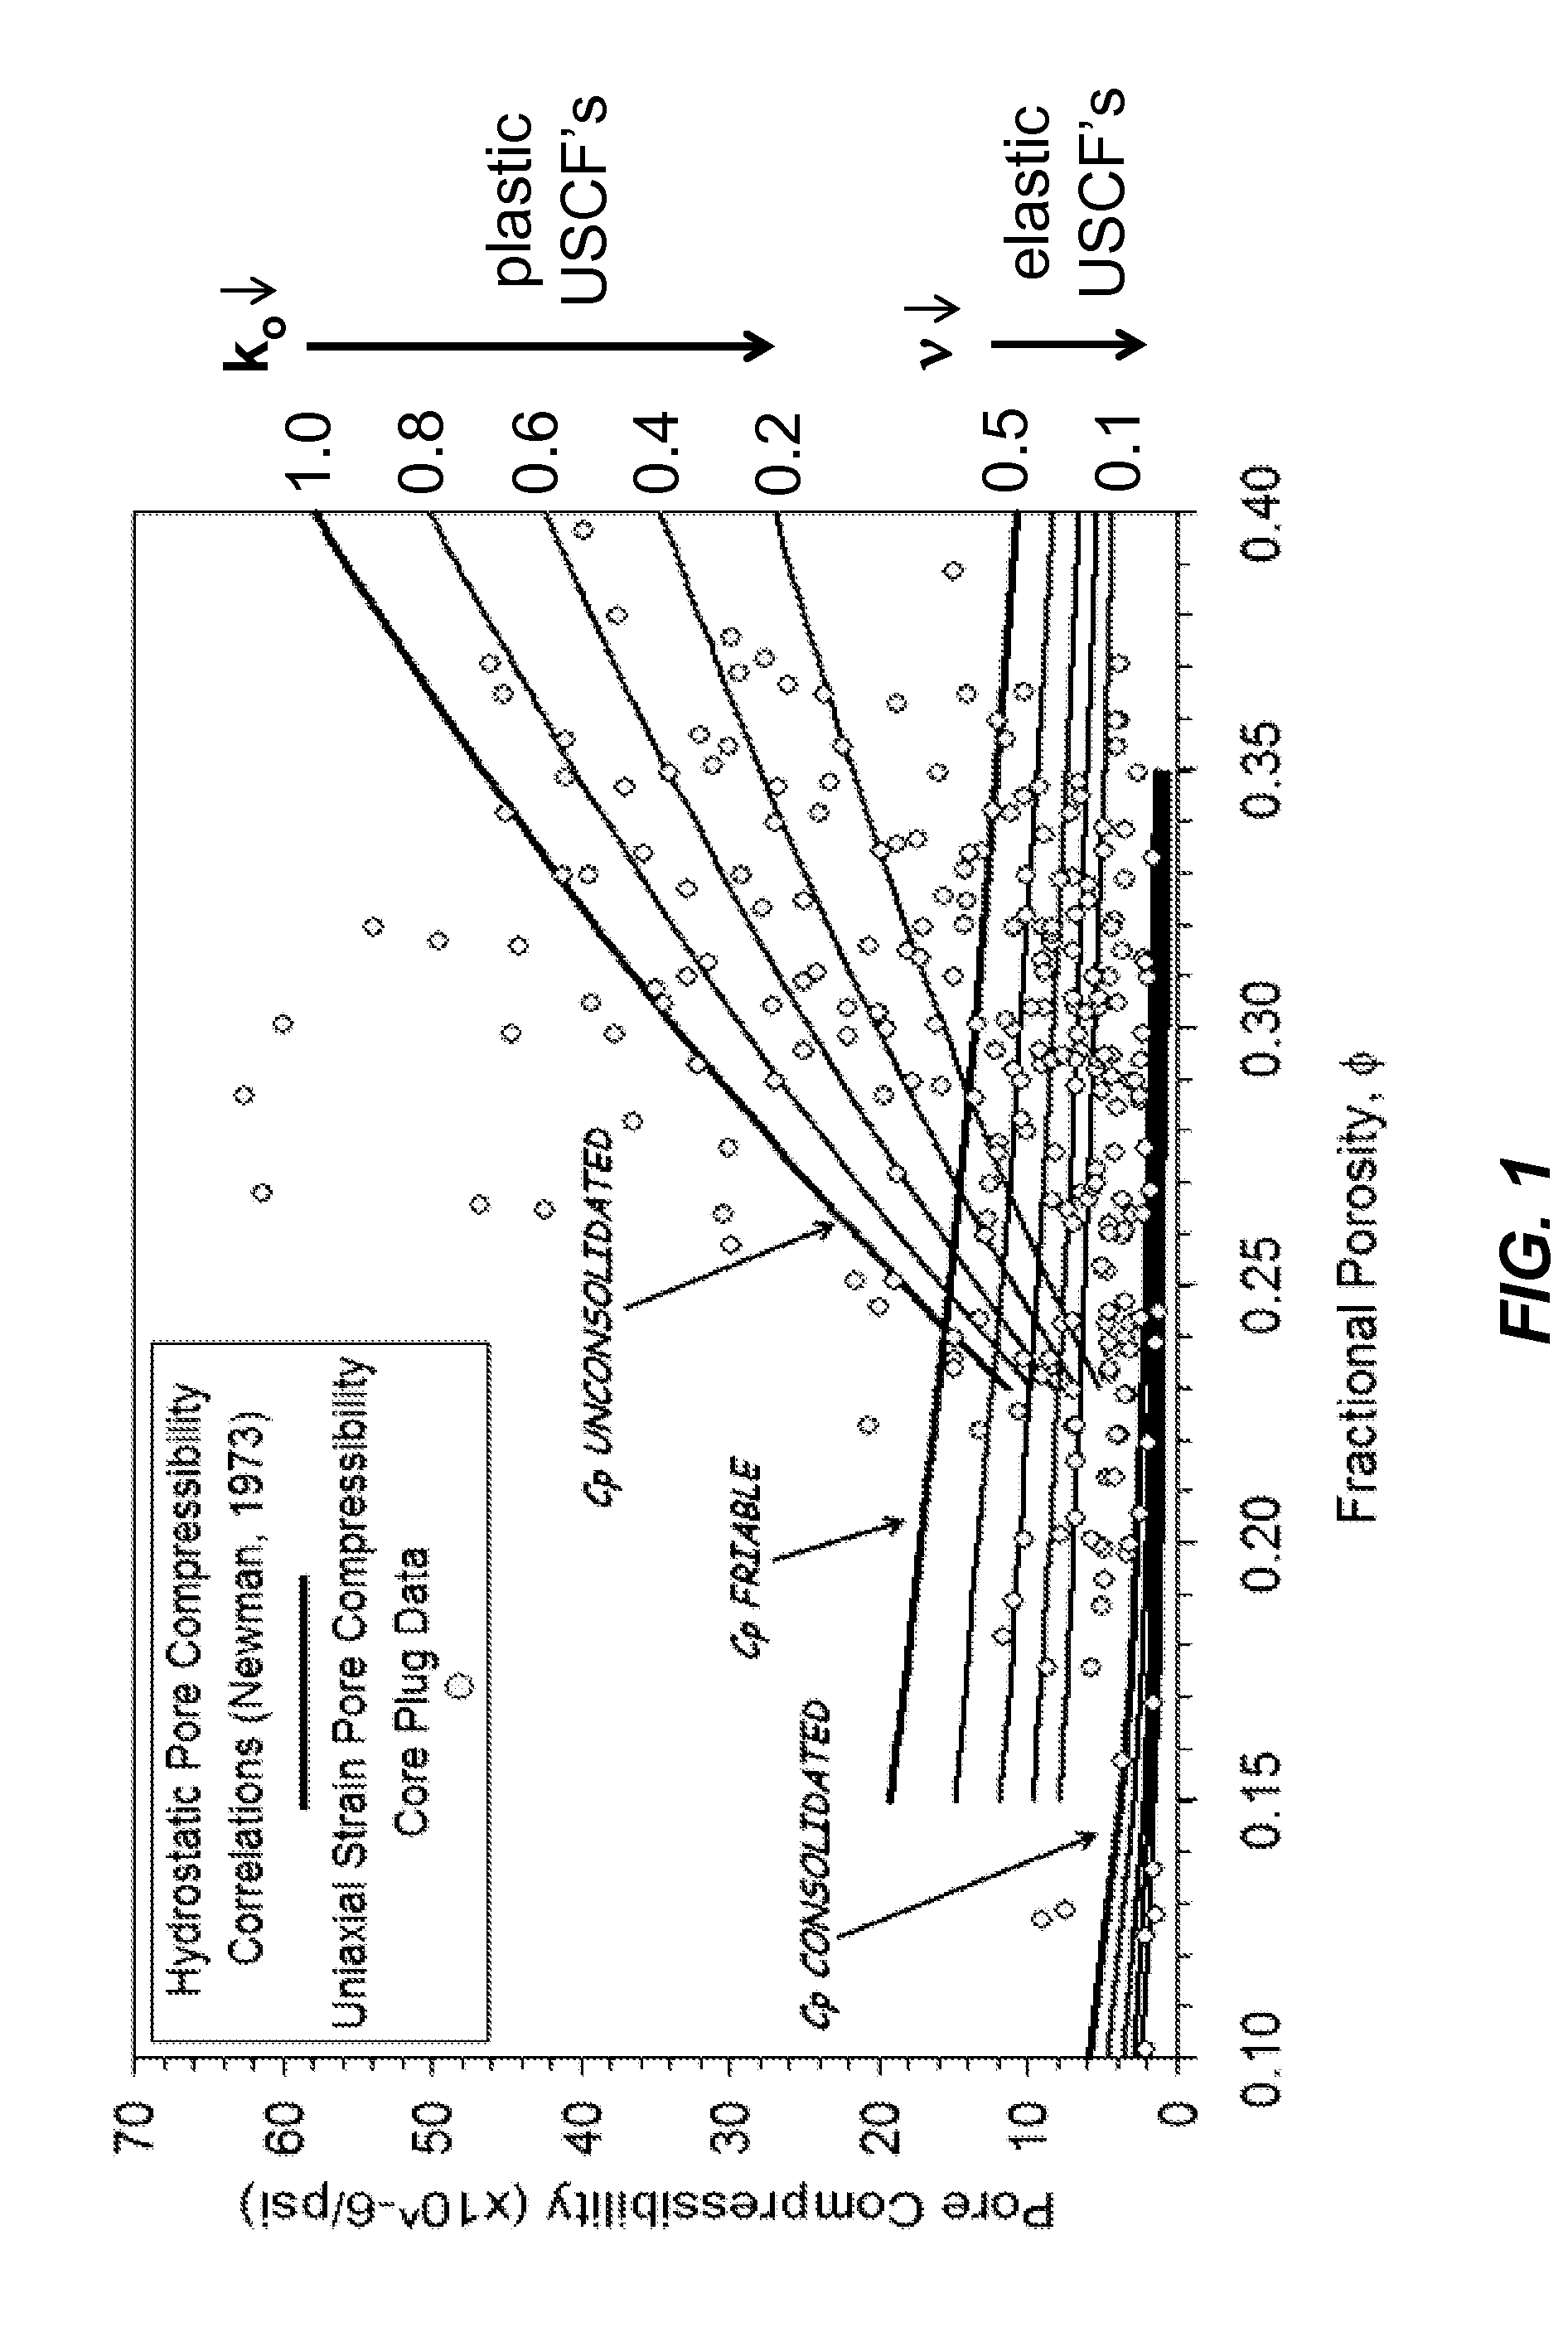 Petrophysical Method For Predicting Plastic Mechanical Properties In Rock Formations